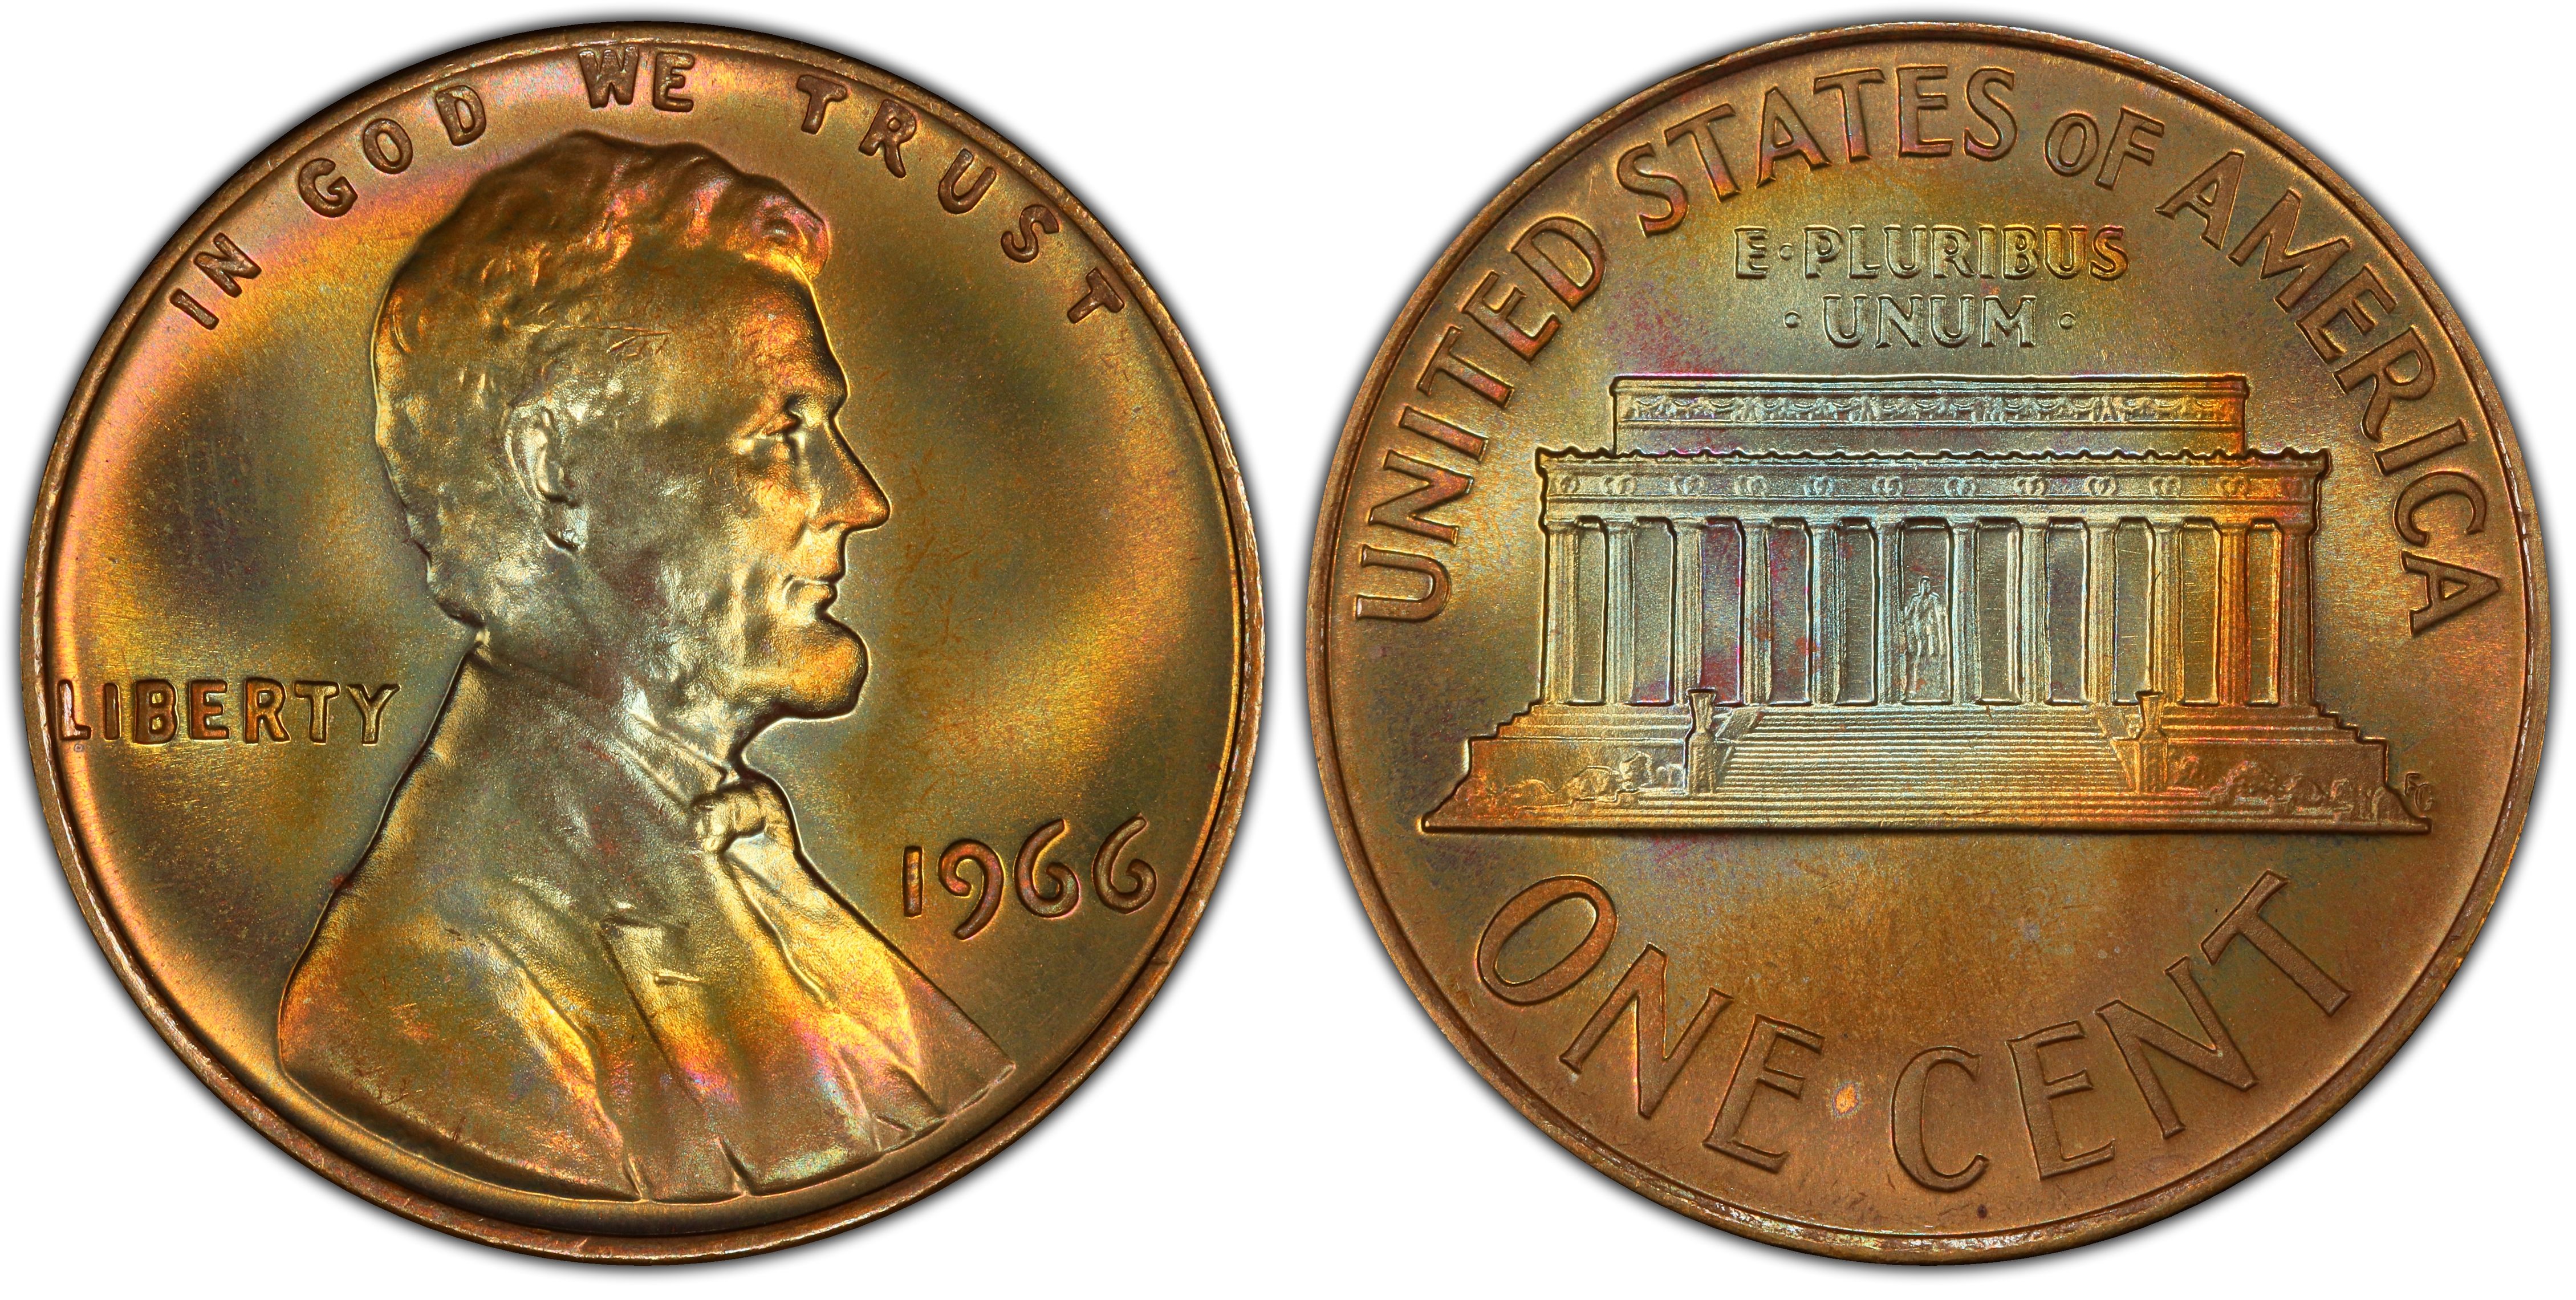 1966 SMS Lincoln Memorial Cent PCGS SP-66 RD, Buy 3 Items, Get $5 Off!!